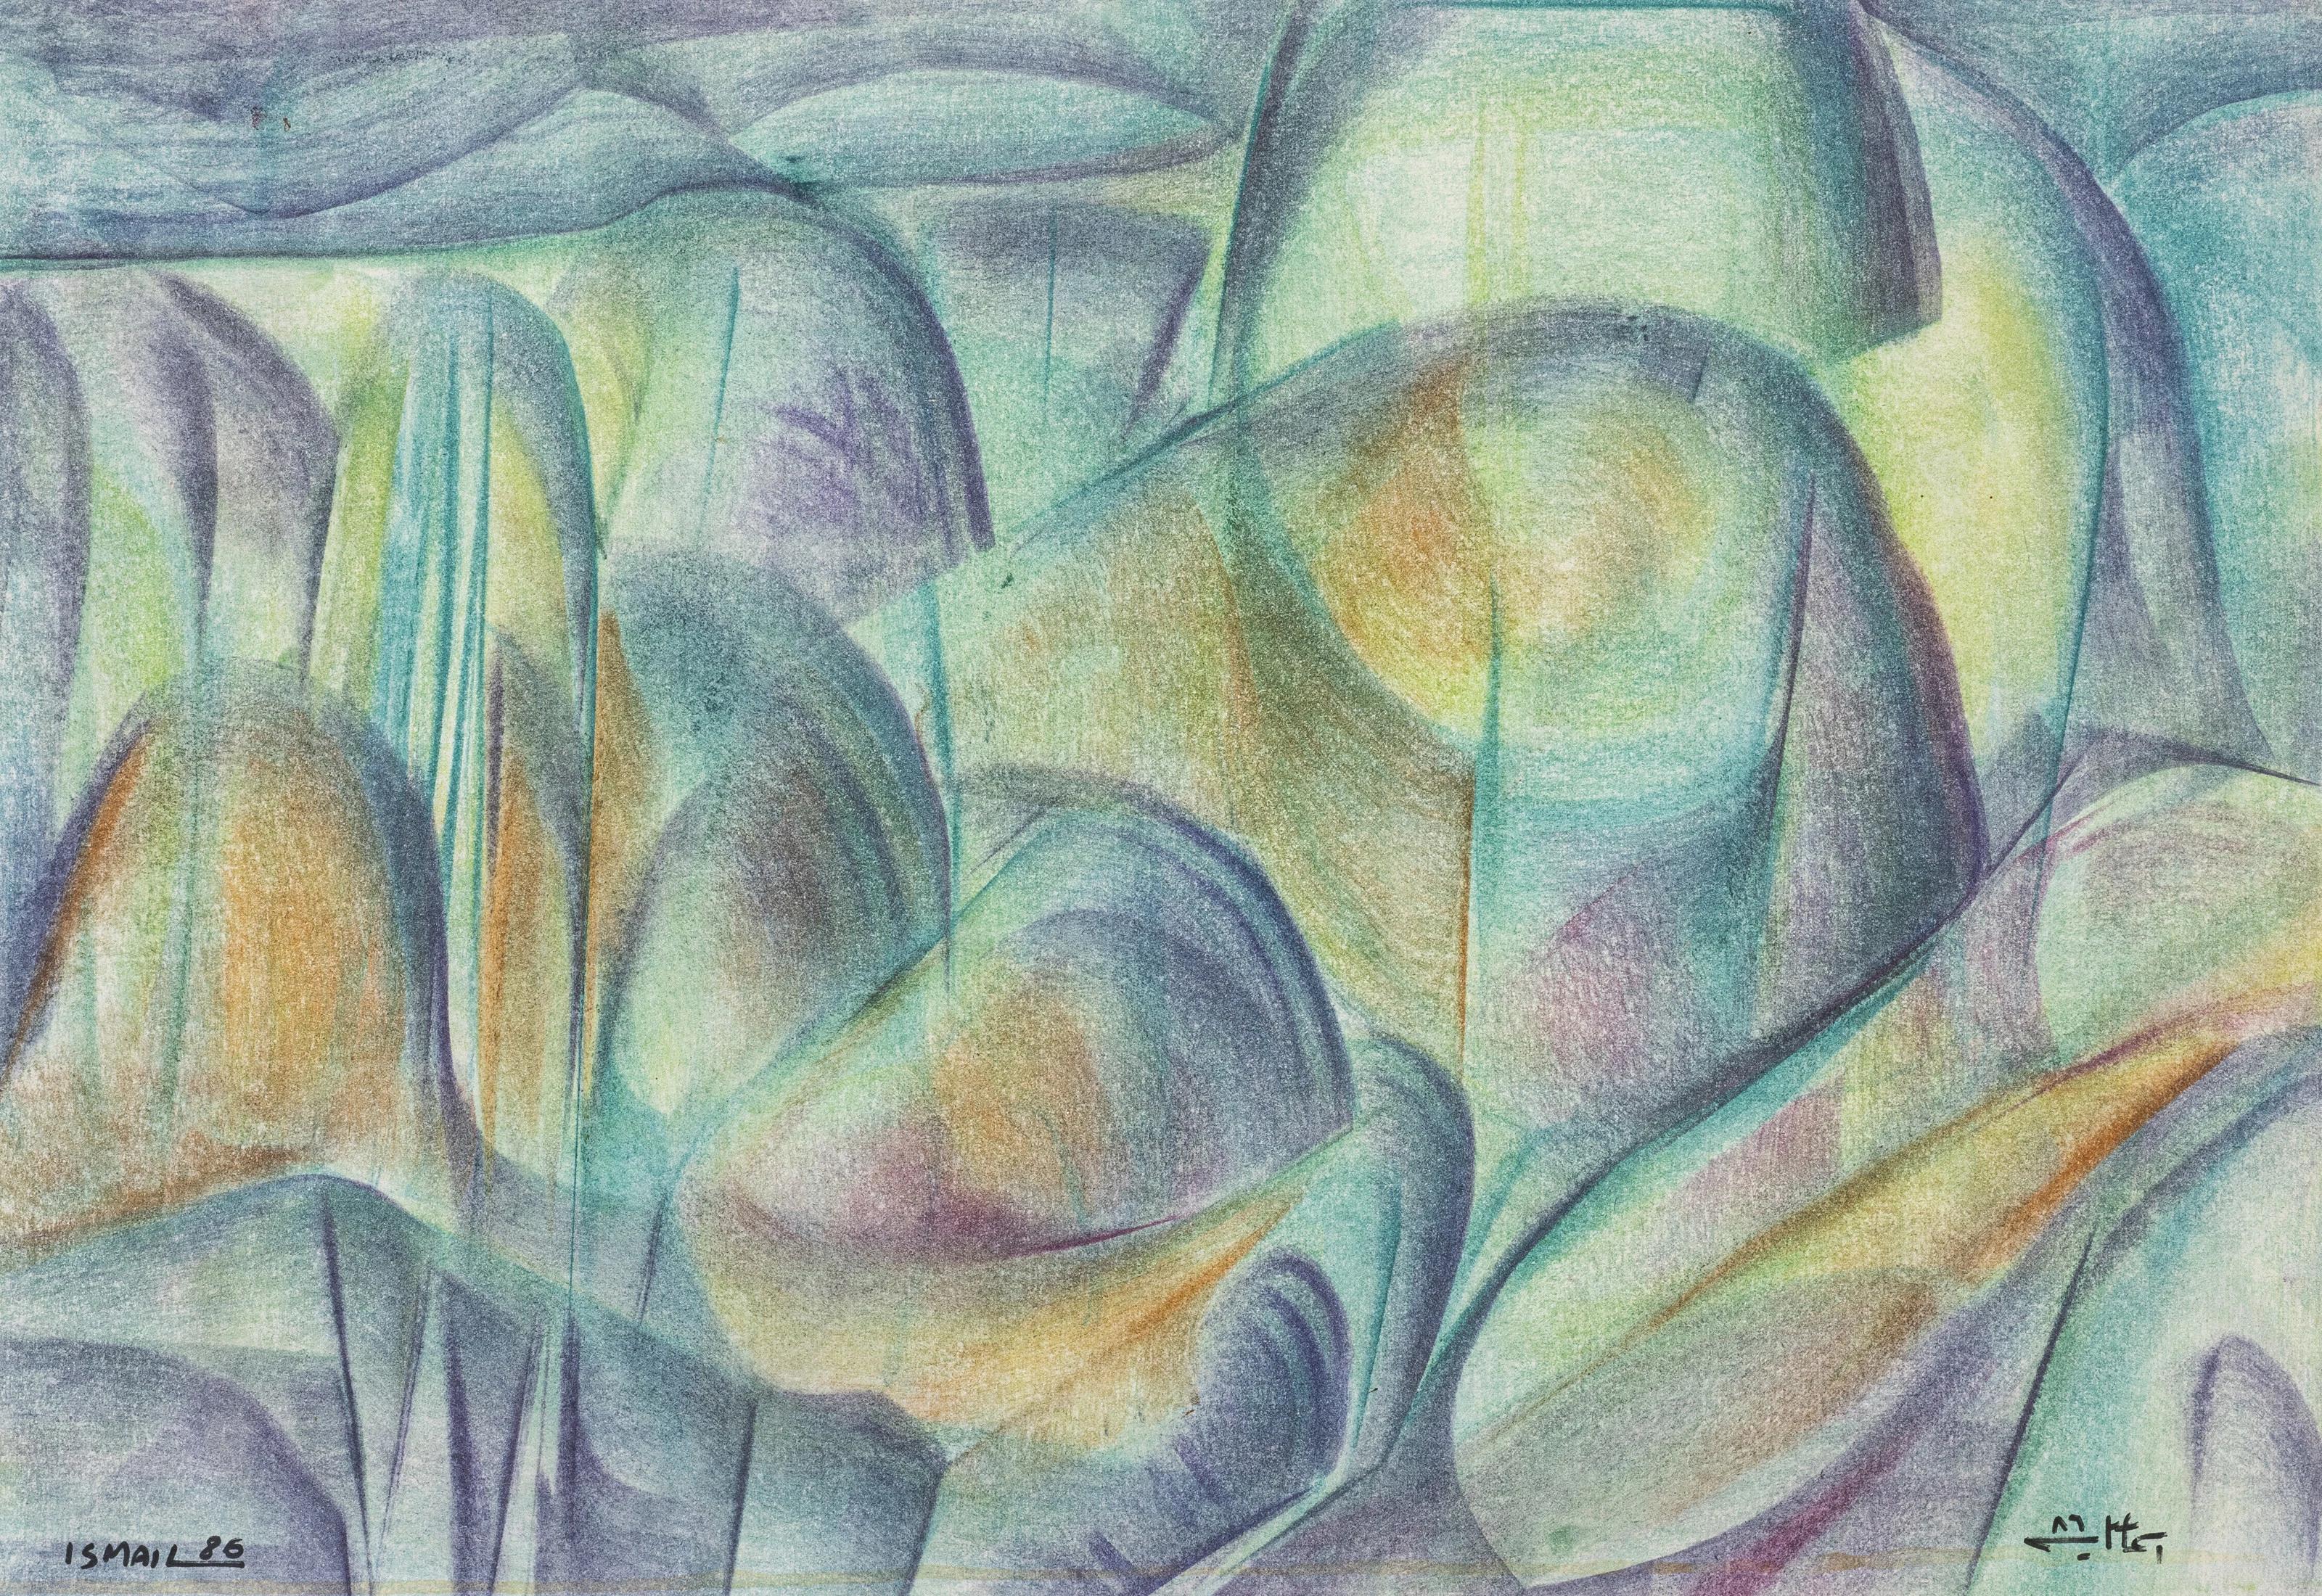 "Abstract Composition" Painting Pastel 8" x 24" inch by Mohammed Ismail 

1986
Signed and Dated 

ABOUT THE ARTIST

Mohammed Ismail (1936-1993)

Dr. Mohamed Ismail was born in 1936 in Zagazig in Egypt. He graduated and obtained his Masters in